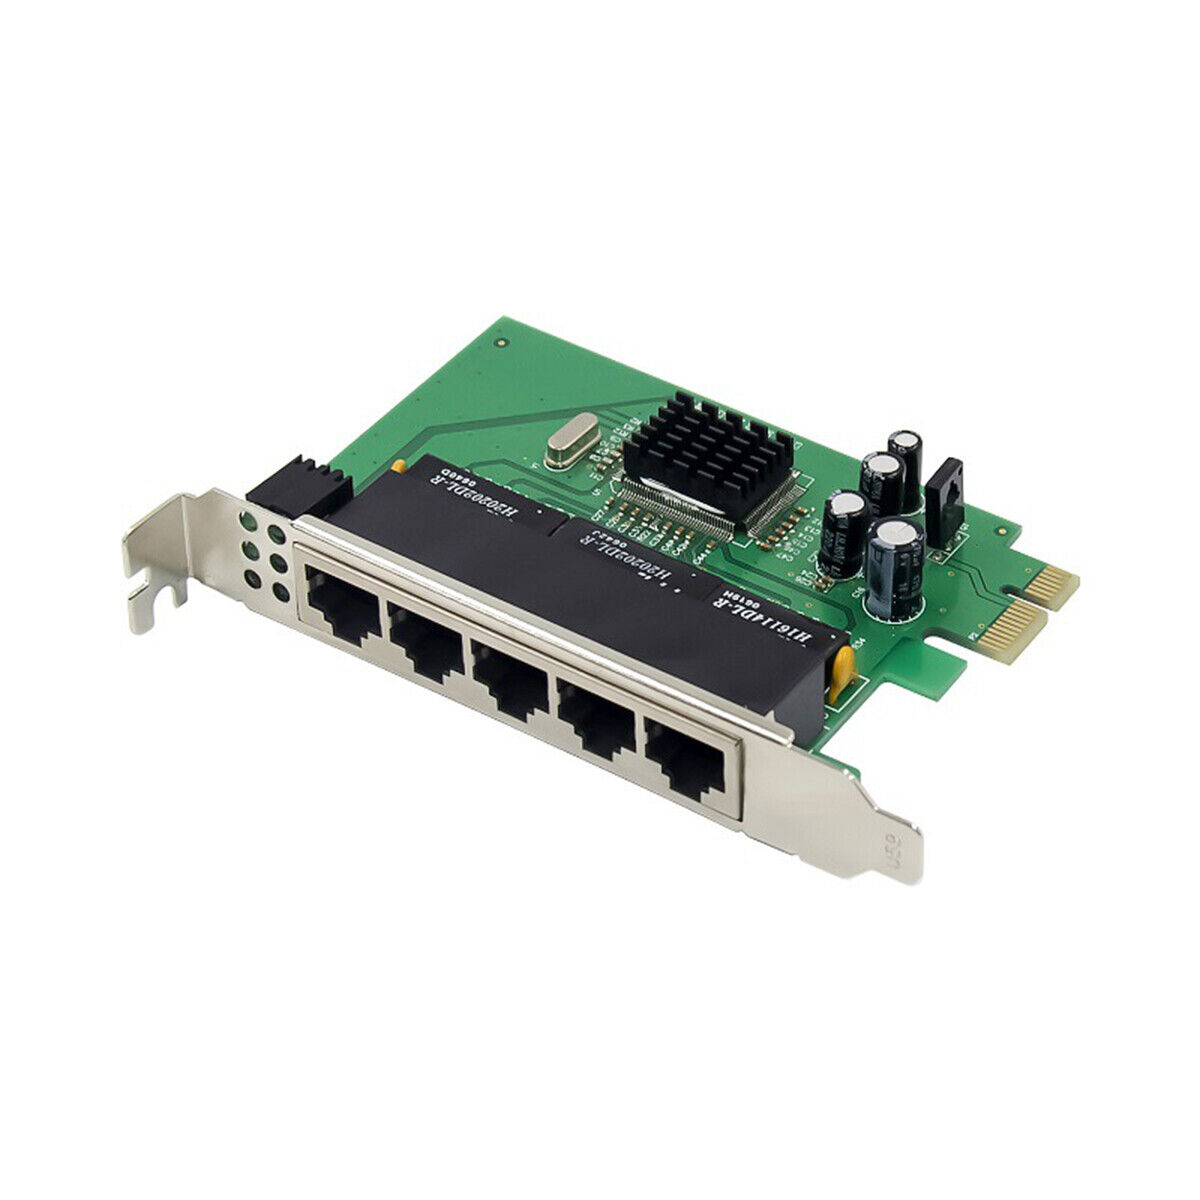 5 Port RJ45 Network Switch PCIe Fast Ethernet 10/100Mbps Switch Board card